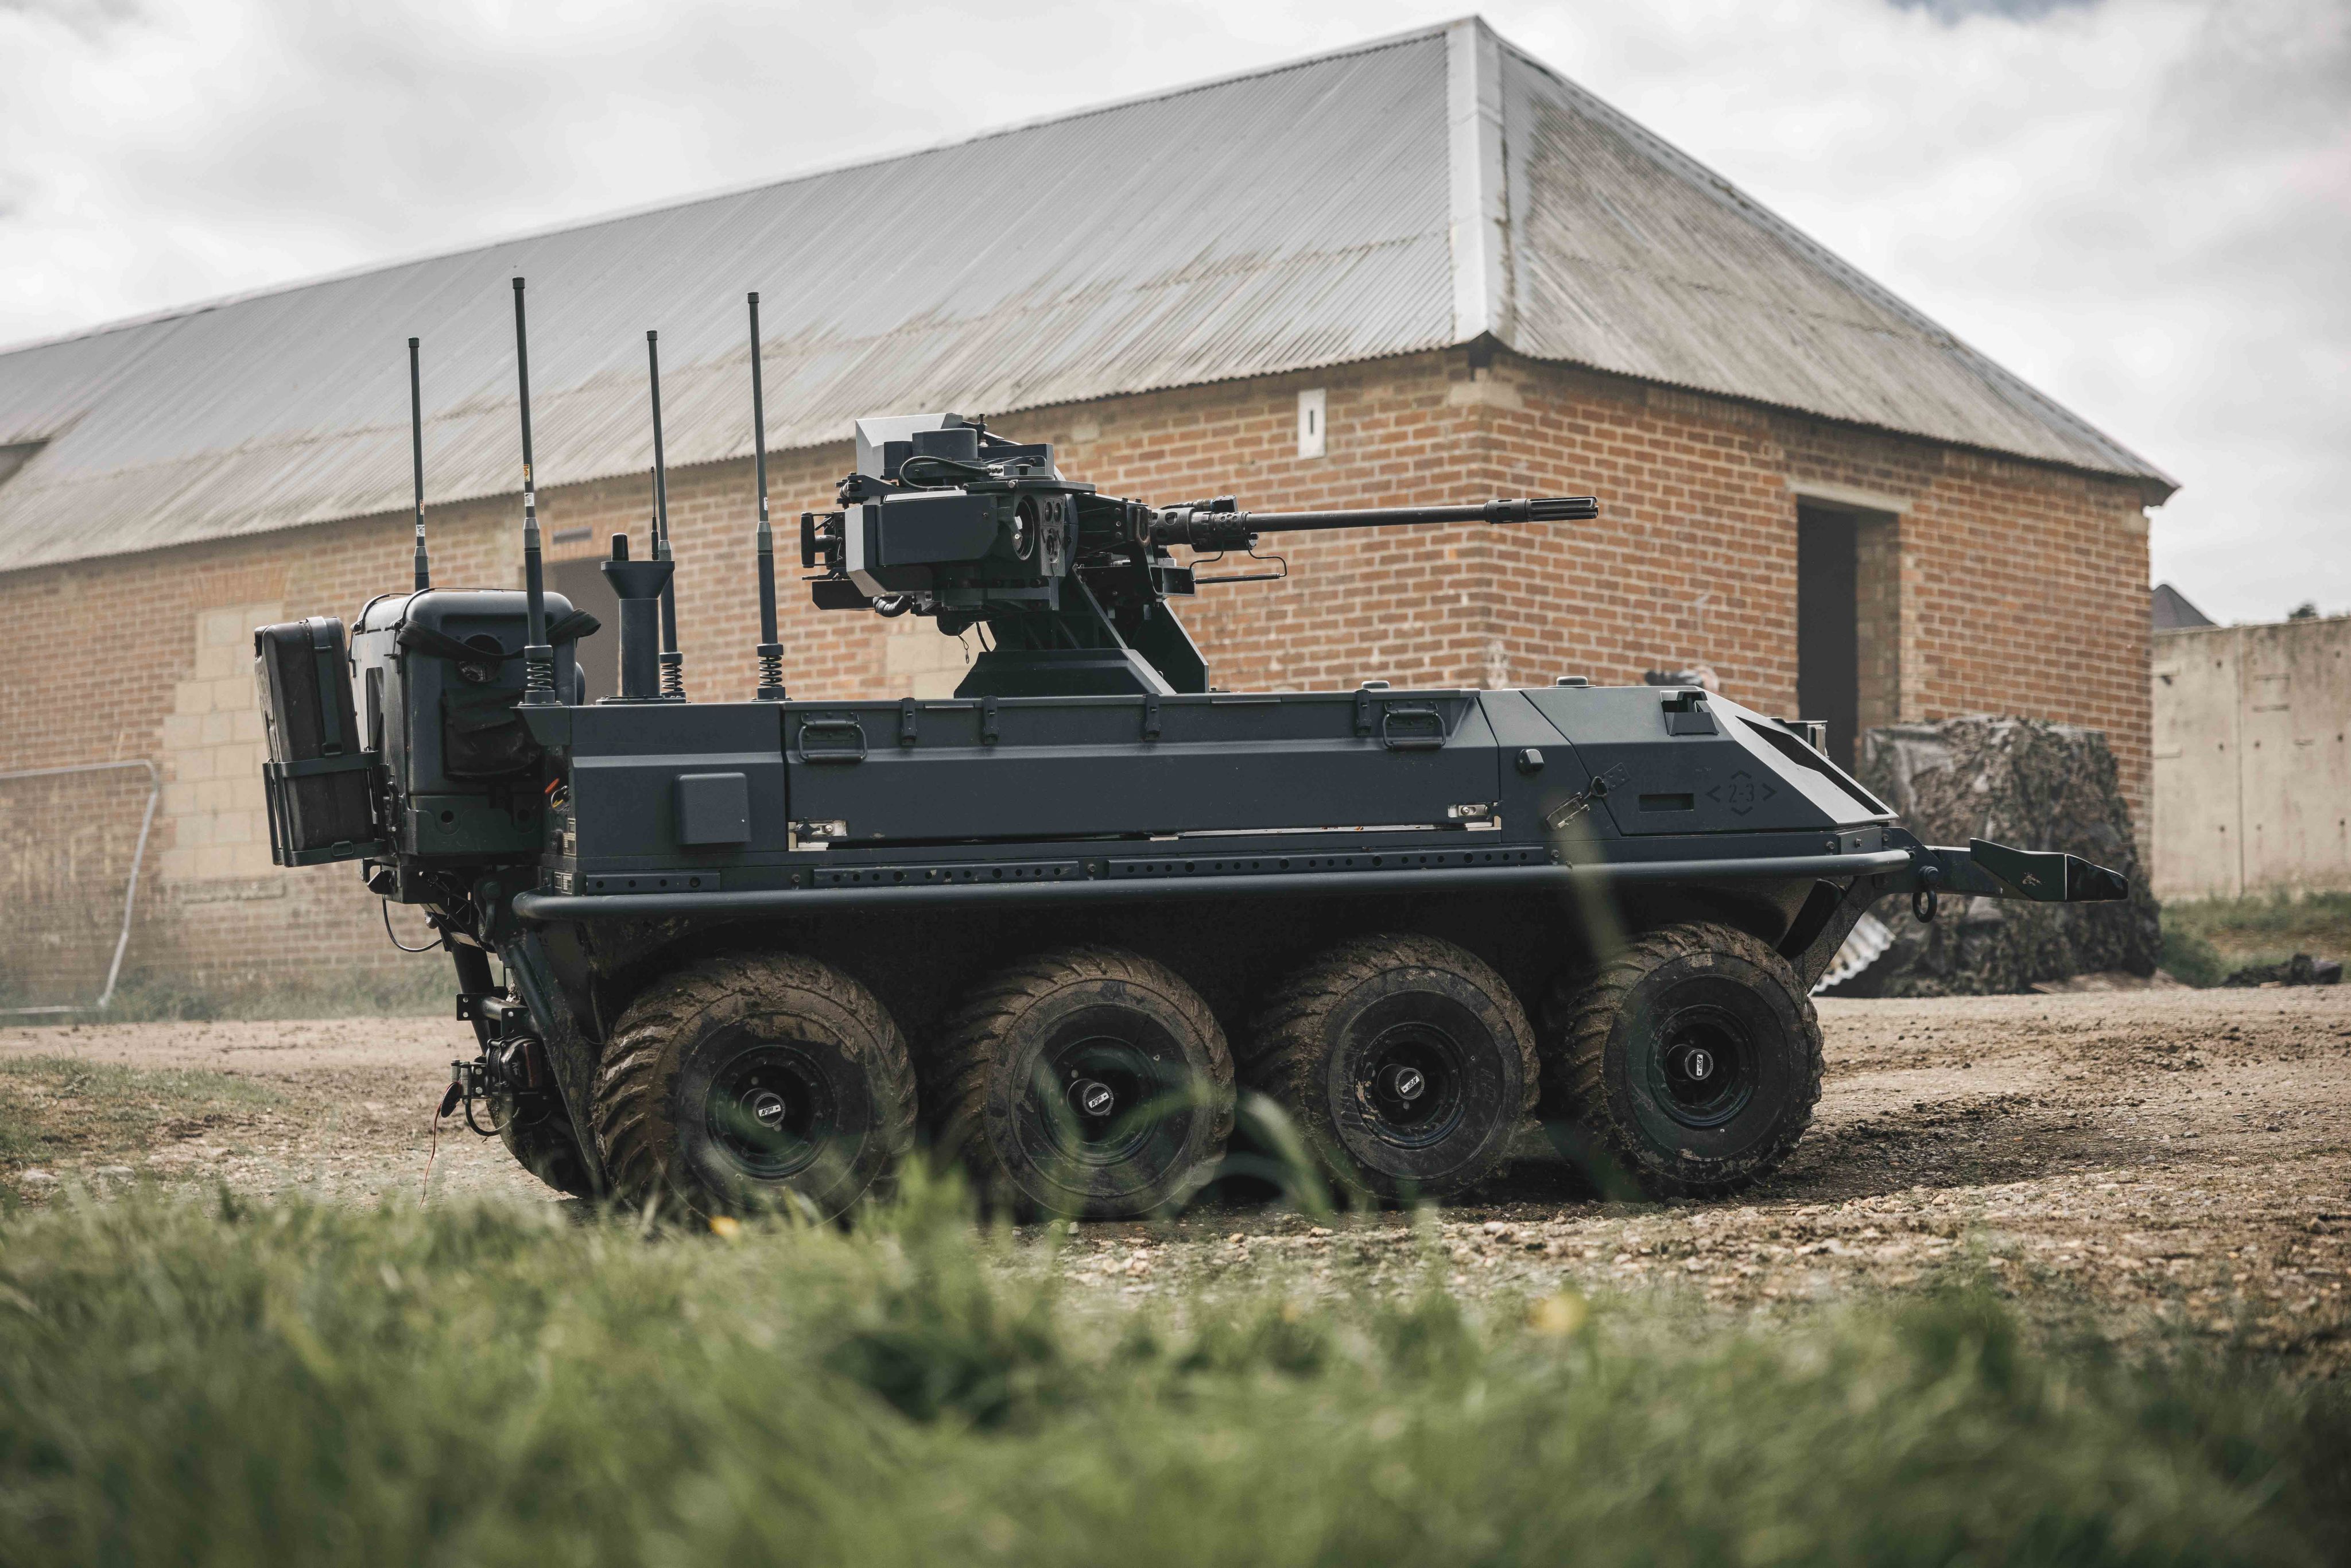 "Image of an Unmanned Ground Vehicle"